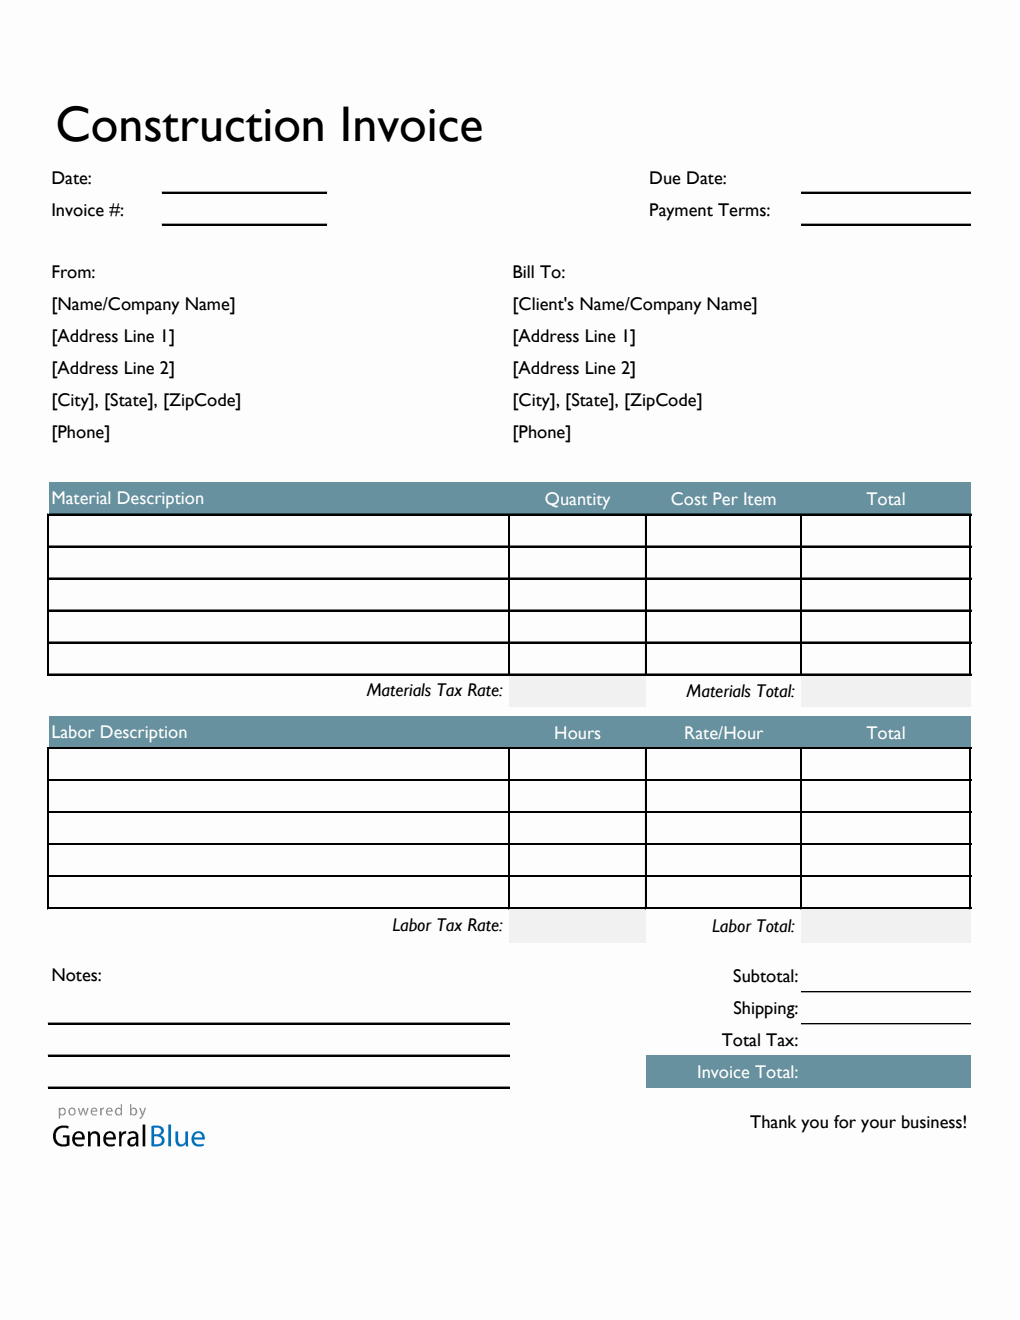 Construction Invoice Template in Excel (Colorful)